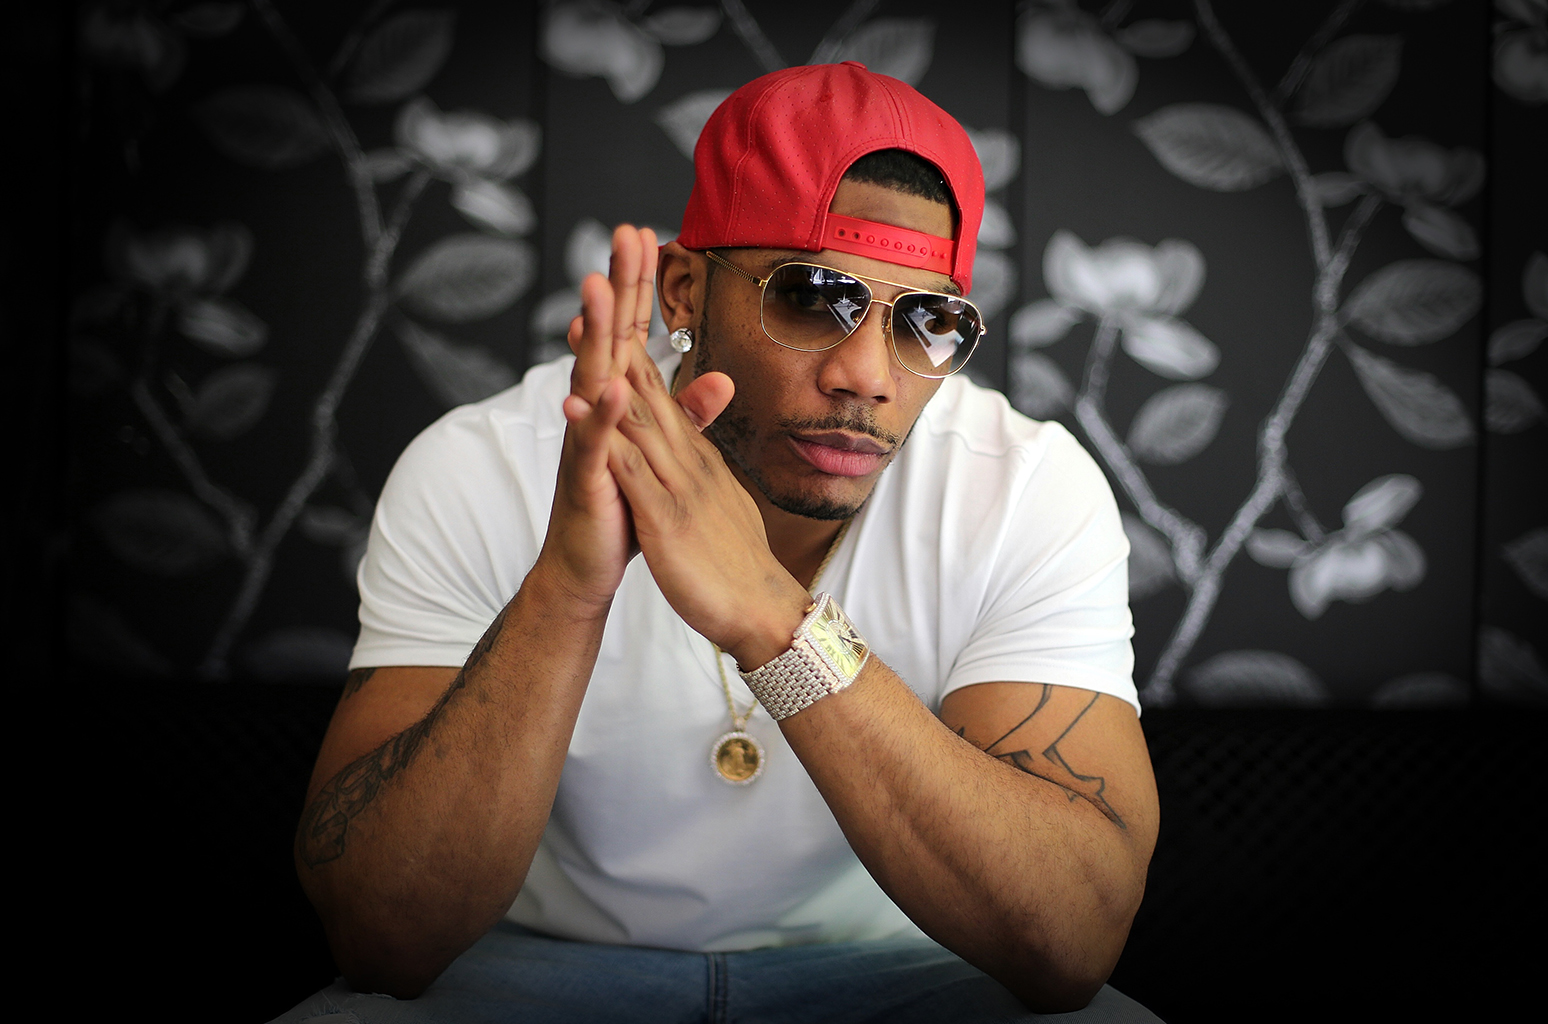 SYDNEY, AUSTRALIA - DECEMBER 19: (EUROPE AND AUSTRALASIA OUT) American rapper Nelly poses during a photo shoot in Sydney, New South Wales to promote his Australian tour. (Photo by Adam Taylor/Newspix/Getty Images)